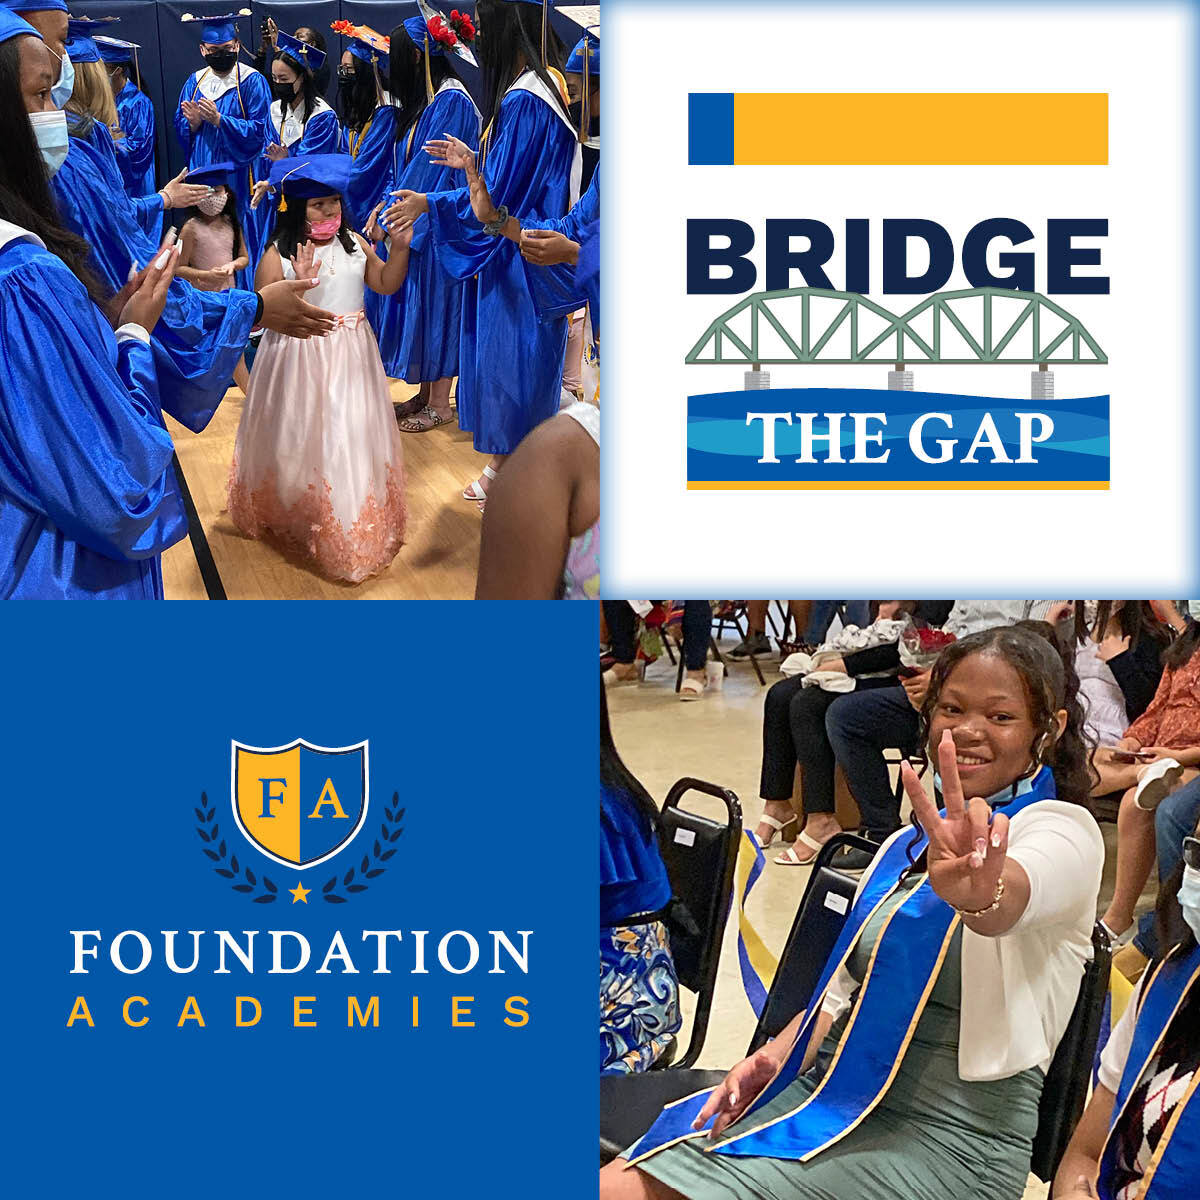 Your support is so important! As a K-12 public charter school, FA operates with nearly $5,000 less per student than our district counterparts. With the support of donors like you, we can bridge this gap. Help us fulfill our promise to our scholars foundationacademies.org/donate/